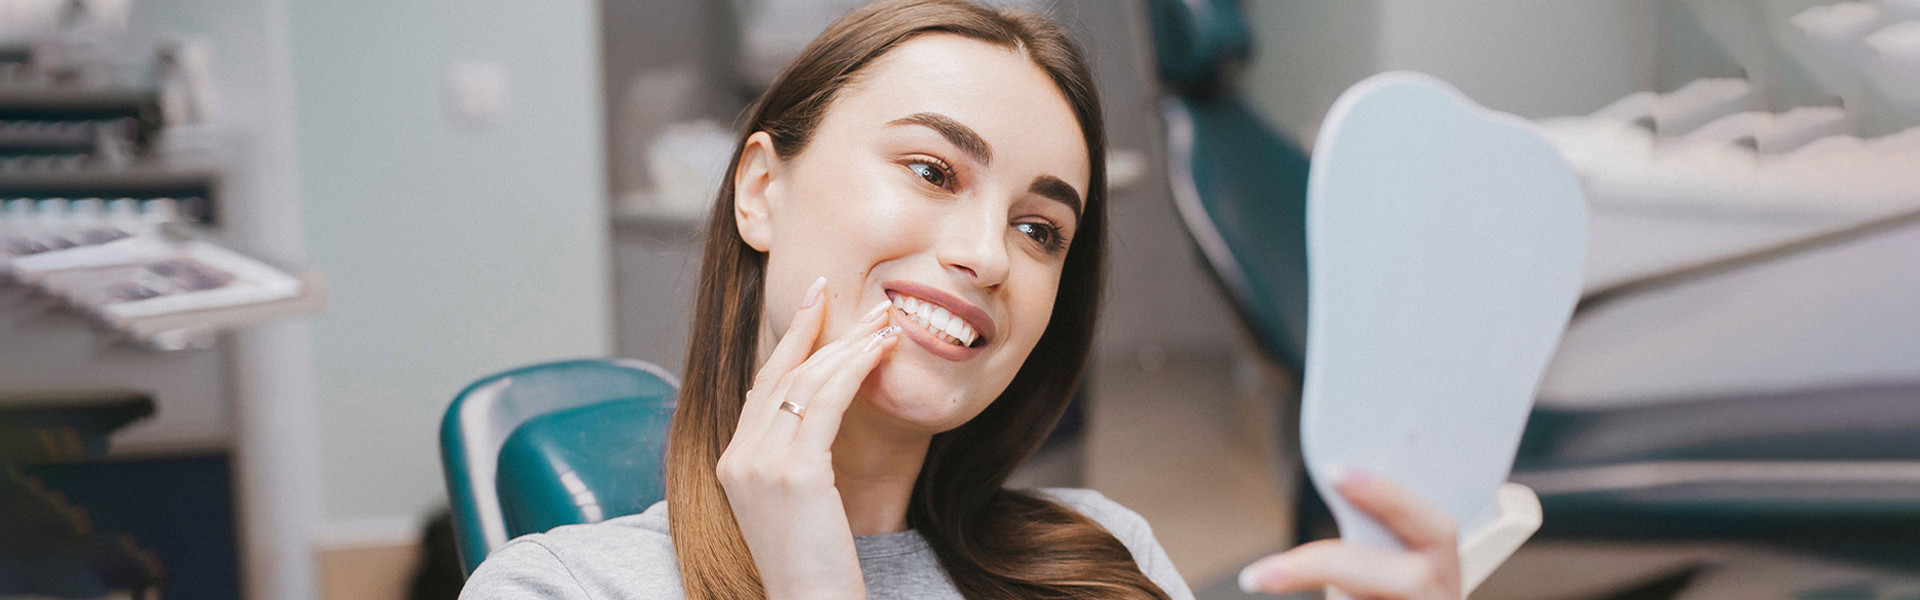 Crown Lengthening: Everything You Need to Know